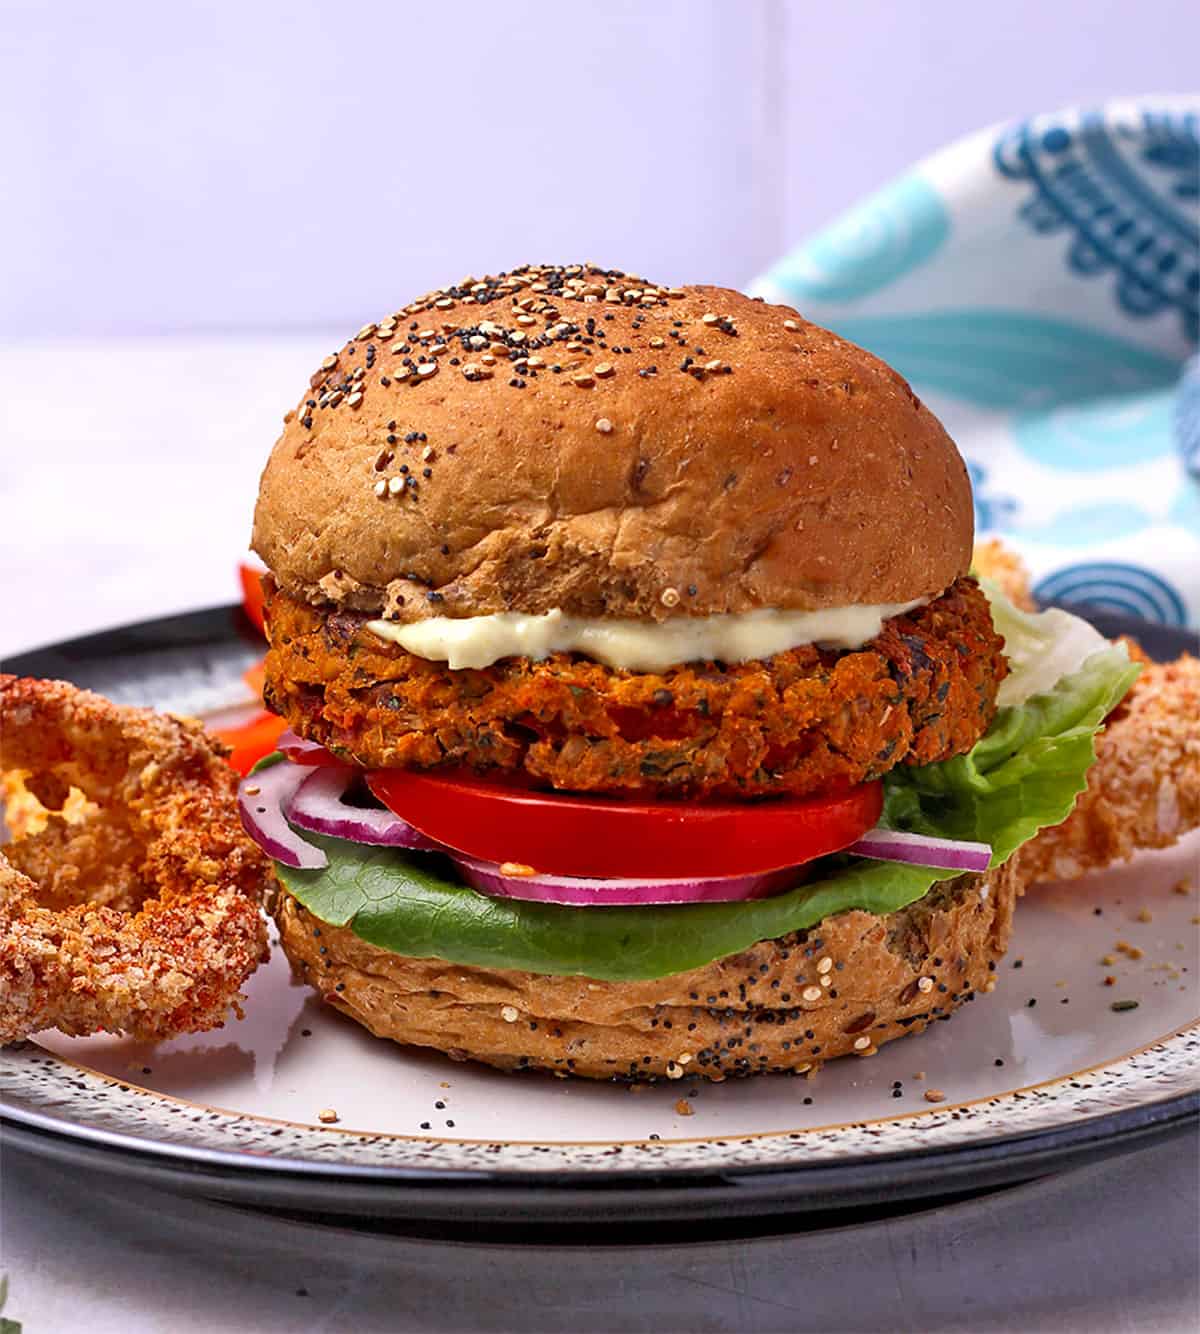 A Mediterranean sweet potato and chickpea burger on a bun with vegan mayo.